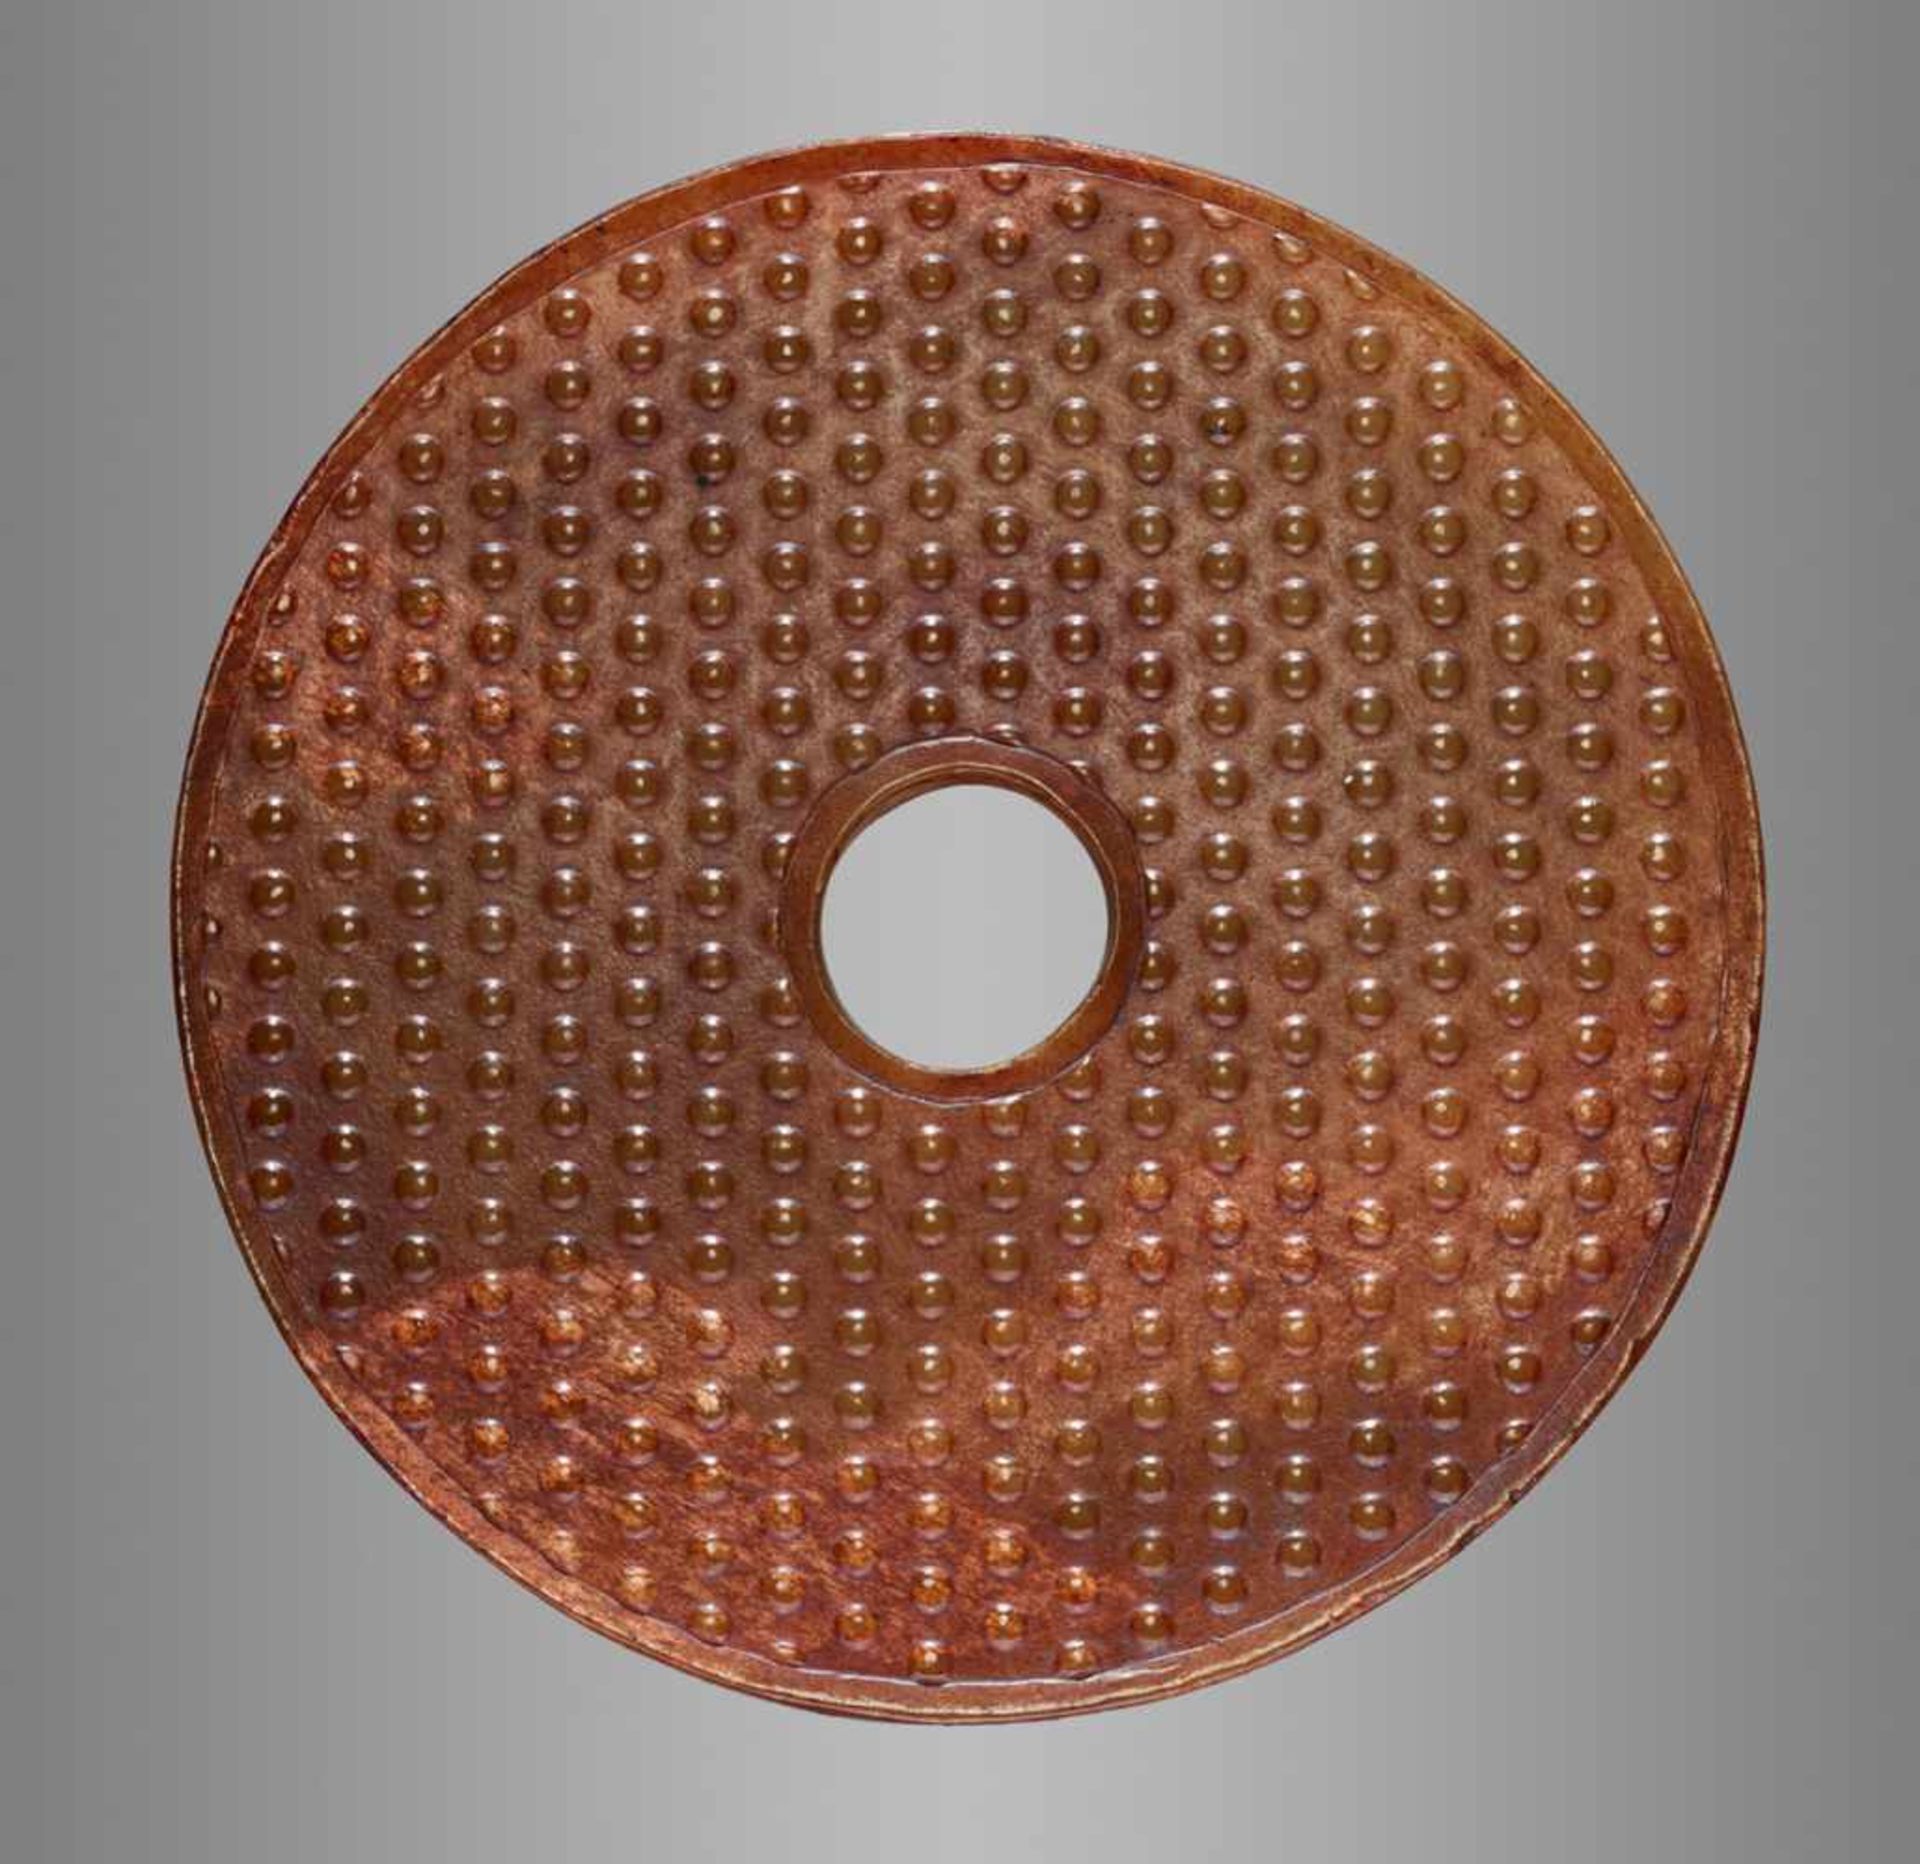 AN ATTRACTIVE AMBER COLOURED BI DISC WITH A PATTERN OF RAISED BOSSES Jade. China, Han Dynasty, 2nd - - Image 3 of 8